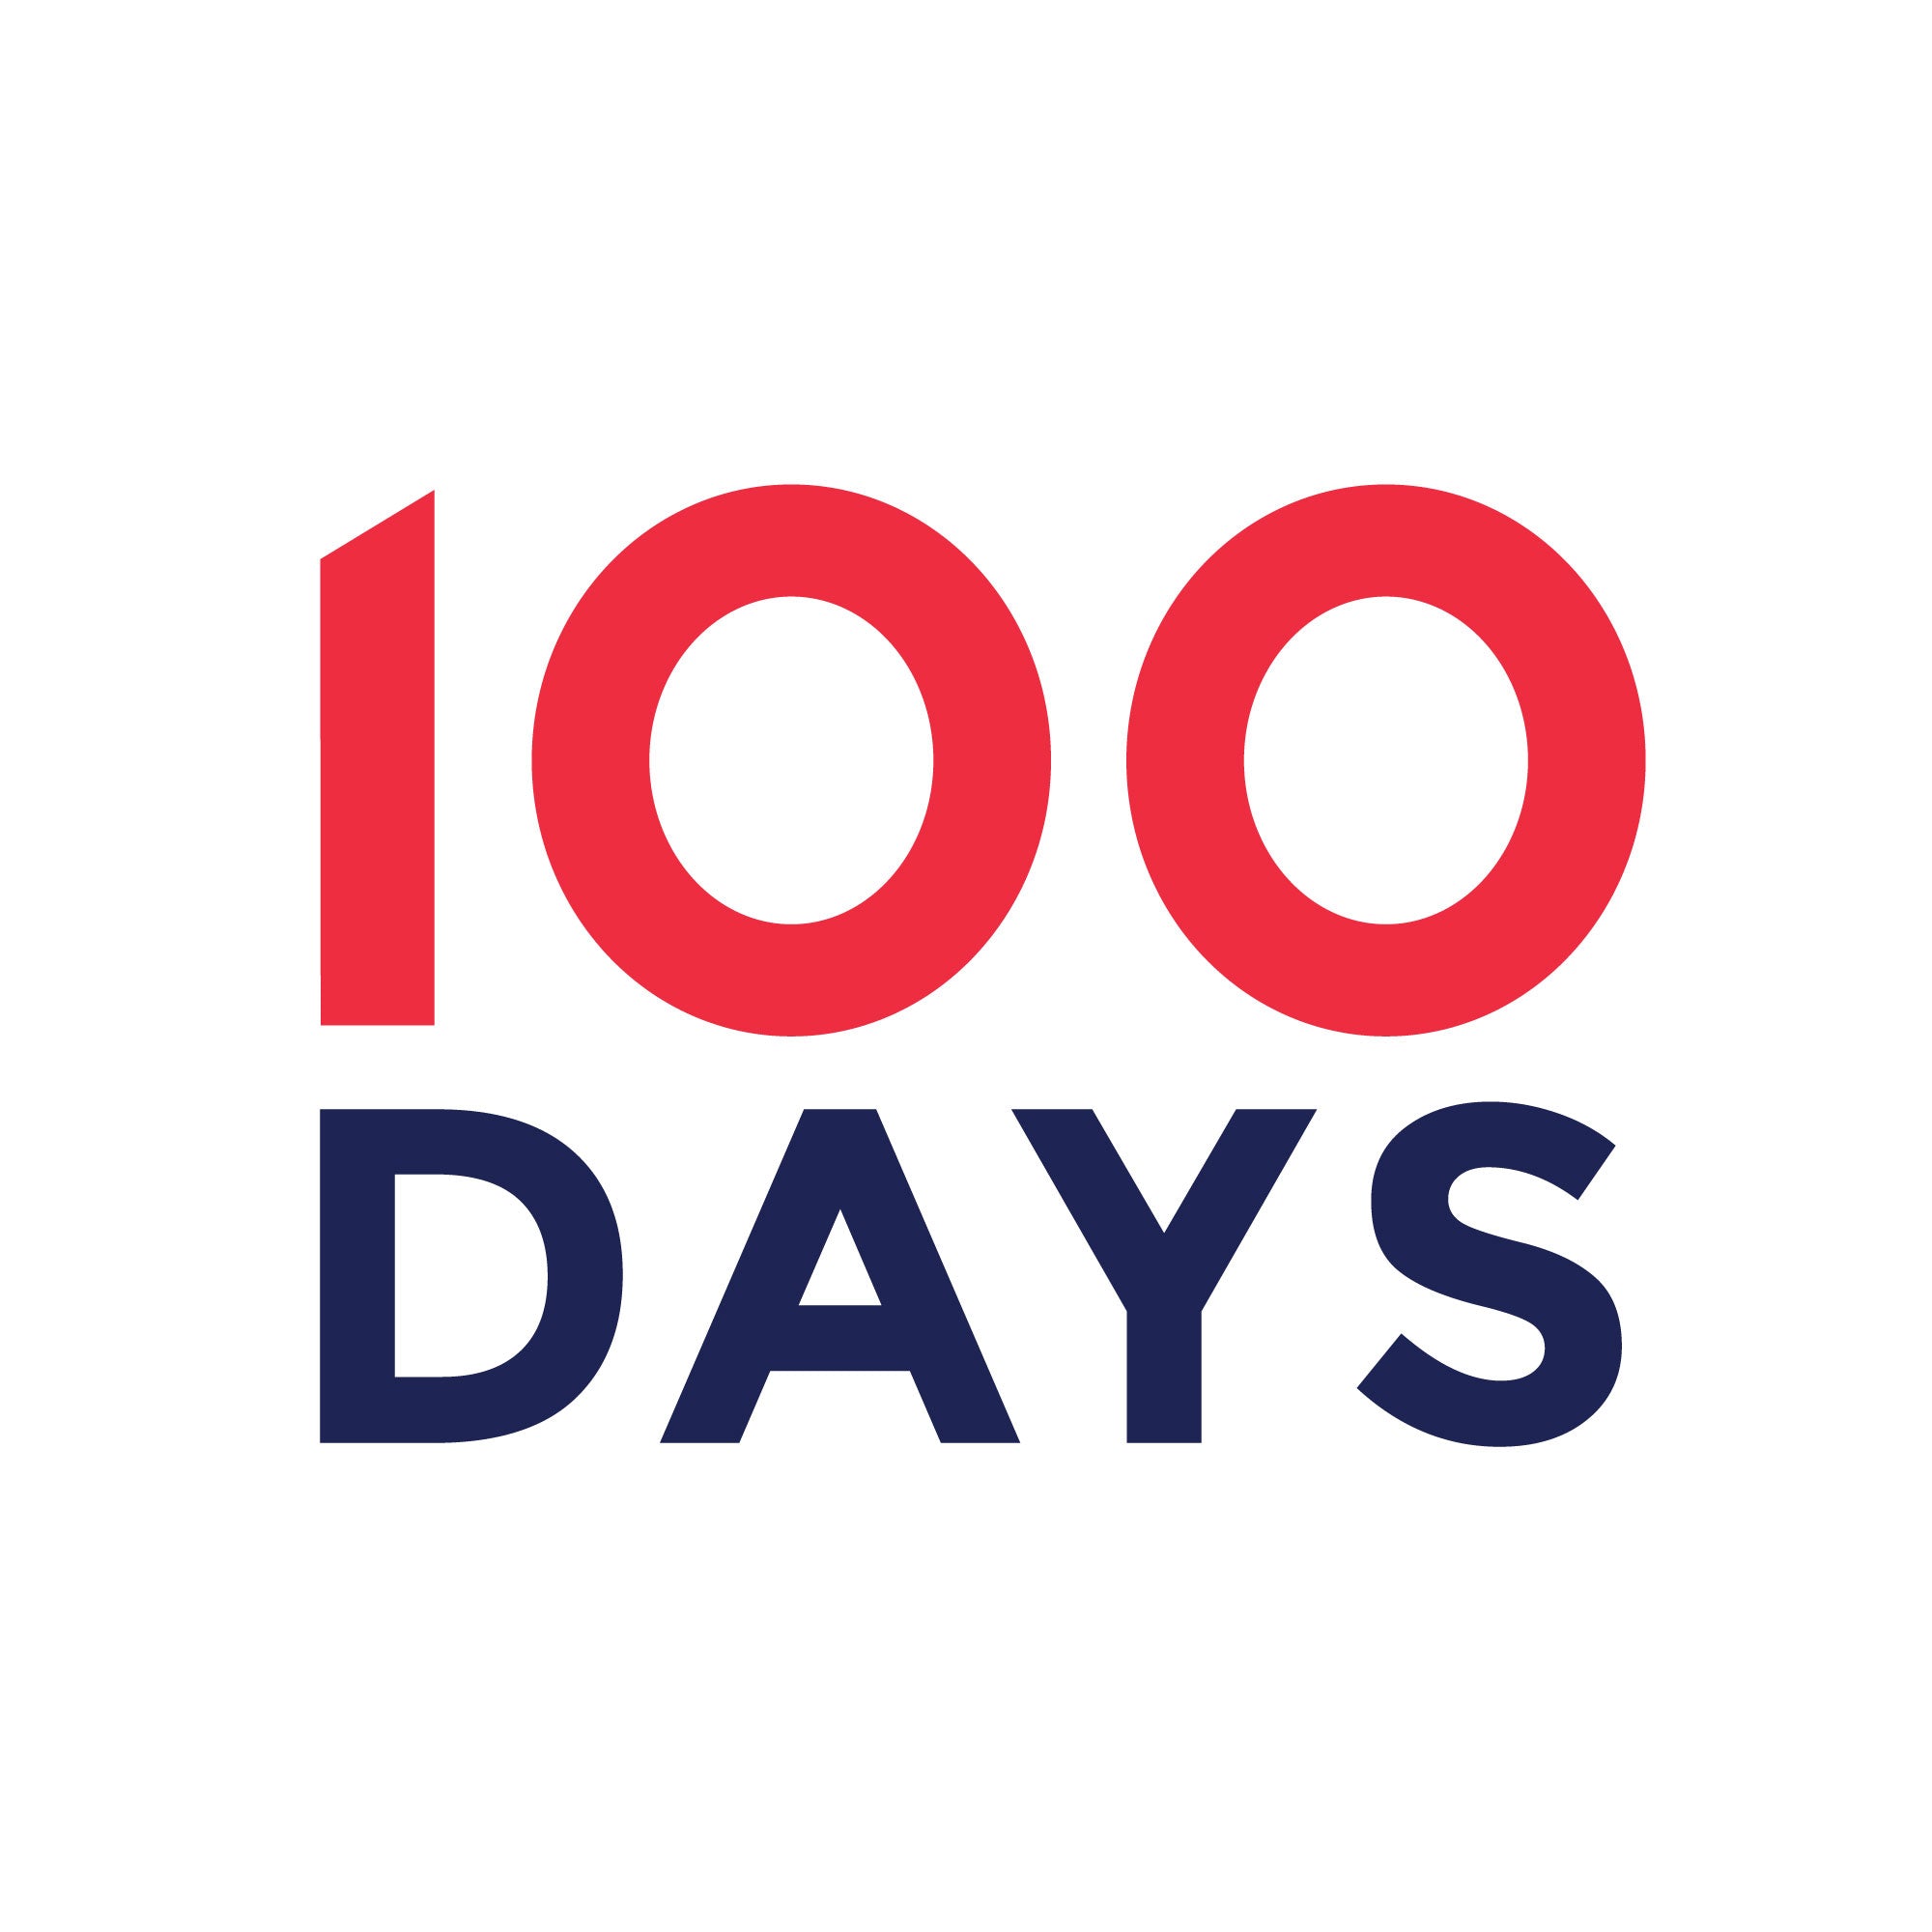 100 days of sales!